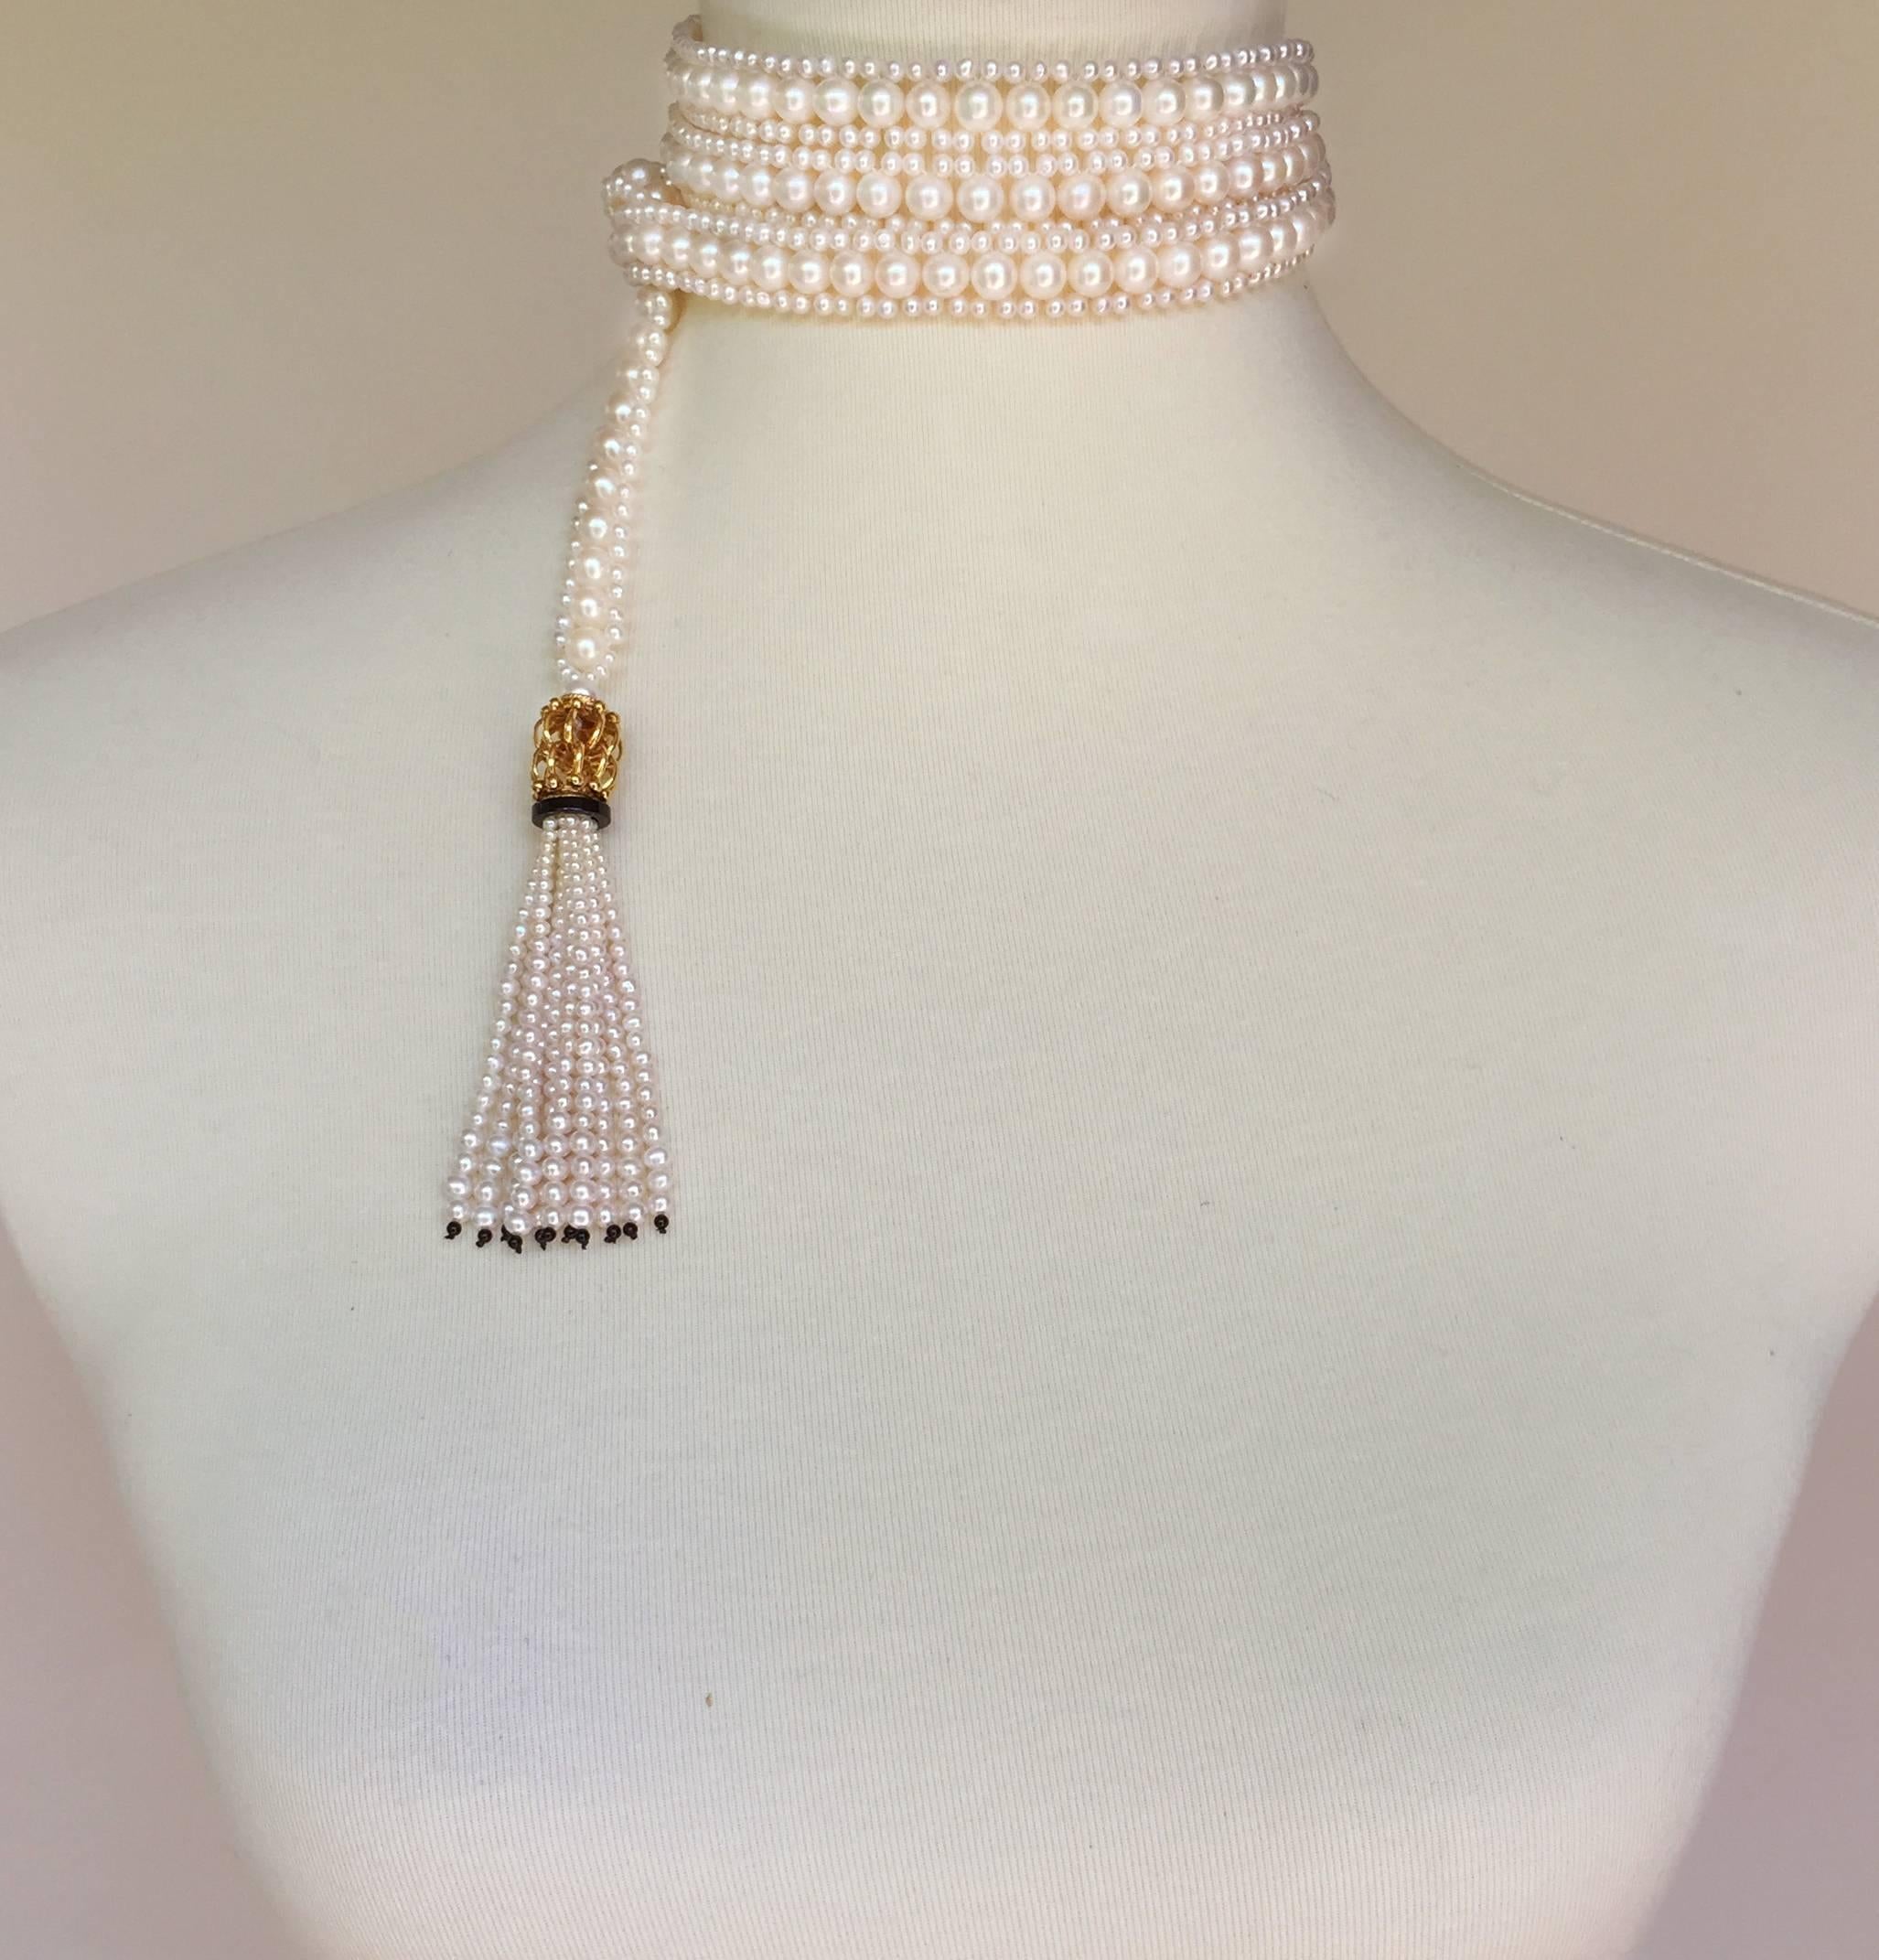 This intricately woven handmade rope sautoir is made of 6.5 mm and 2.5mm white pearls. The tassels are topped with large gold plated intertwined beads, followed by a onyx rondelles hand decorated with fine seed pearls and finished with subtlety